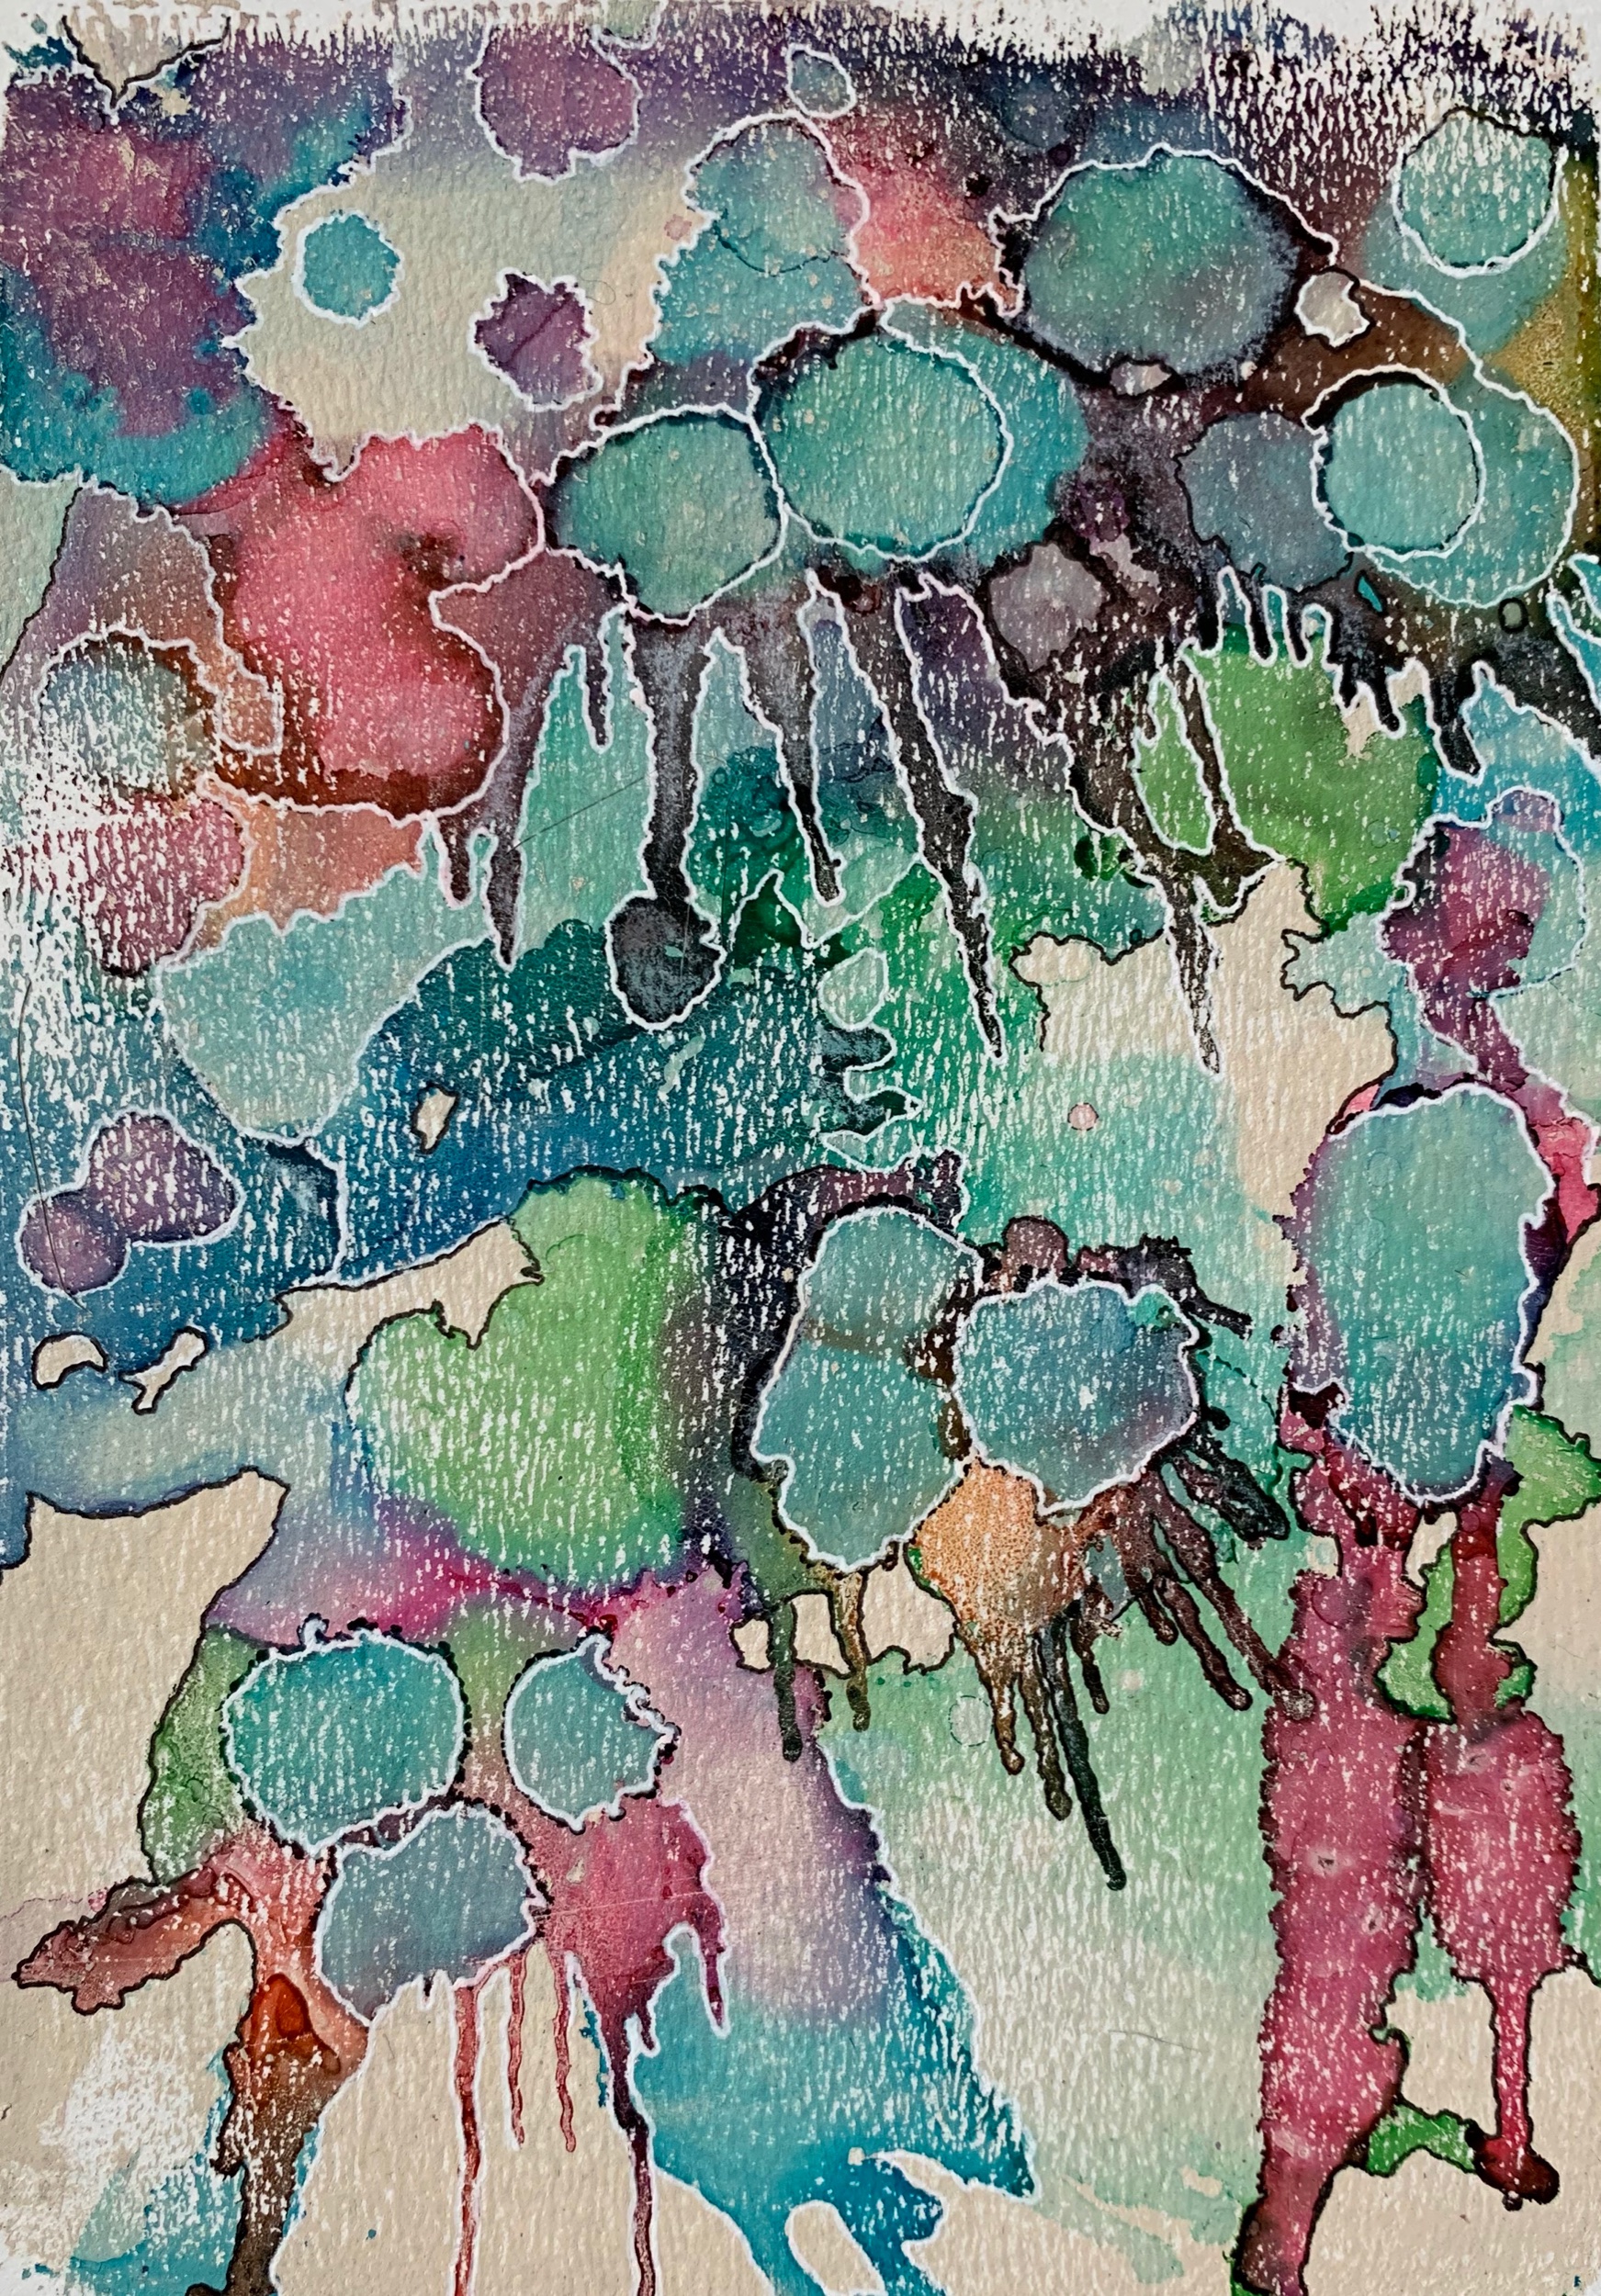  Alcohol ink and gelliplate printmaking on watercolor paper. 5” x 7” 